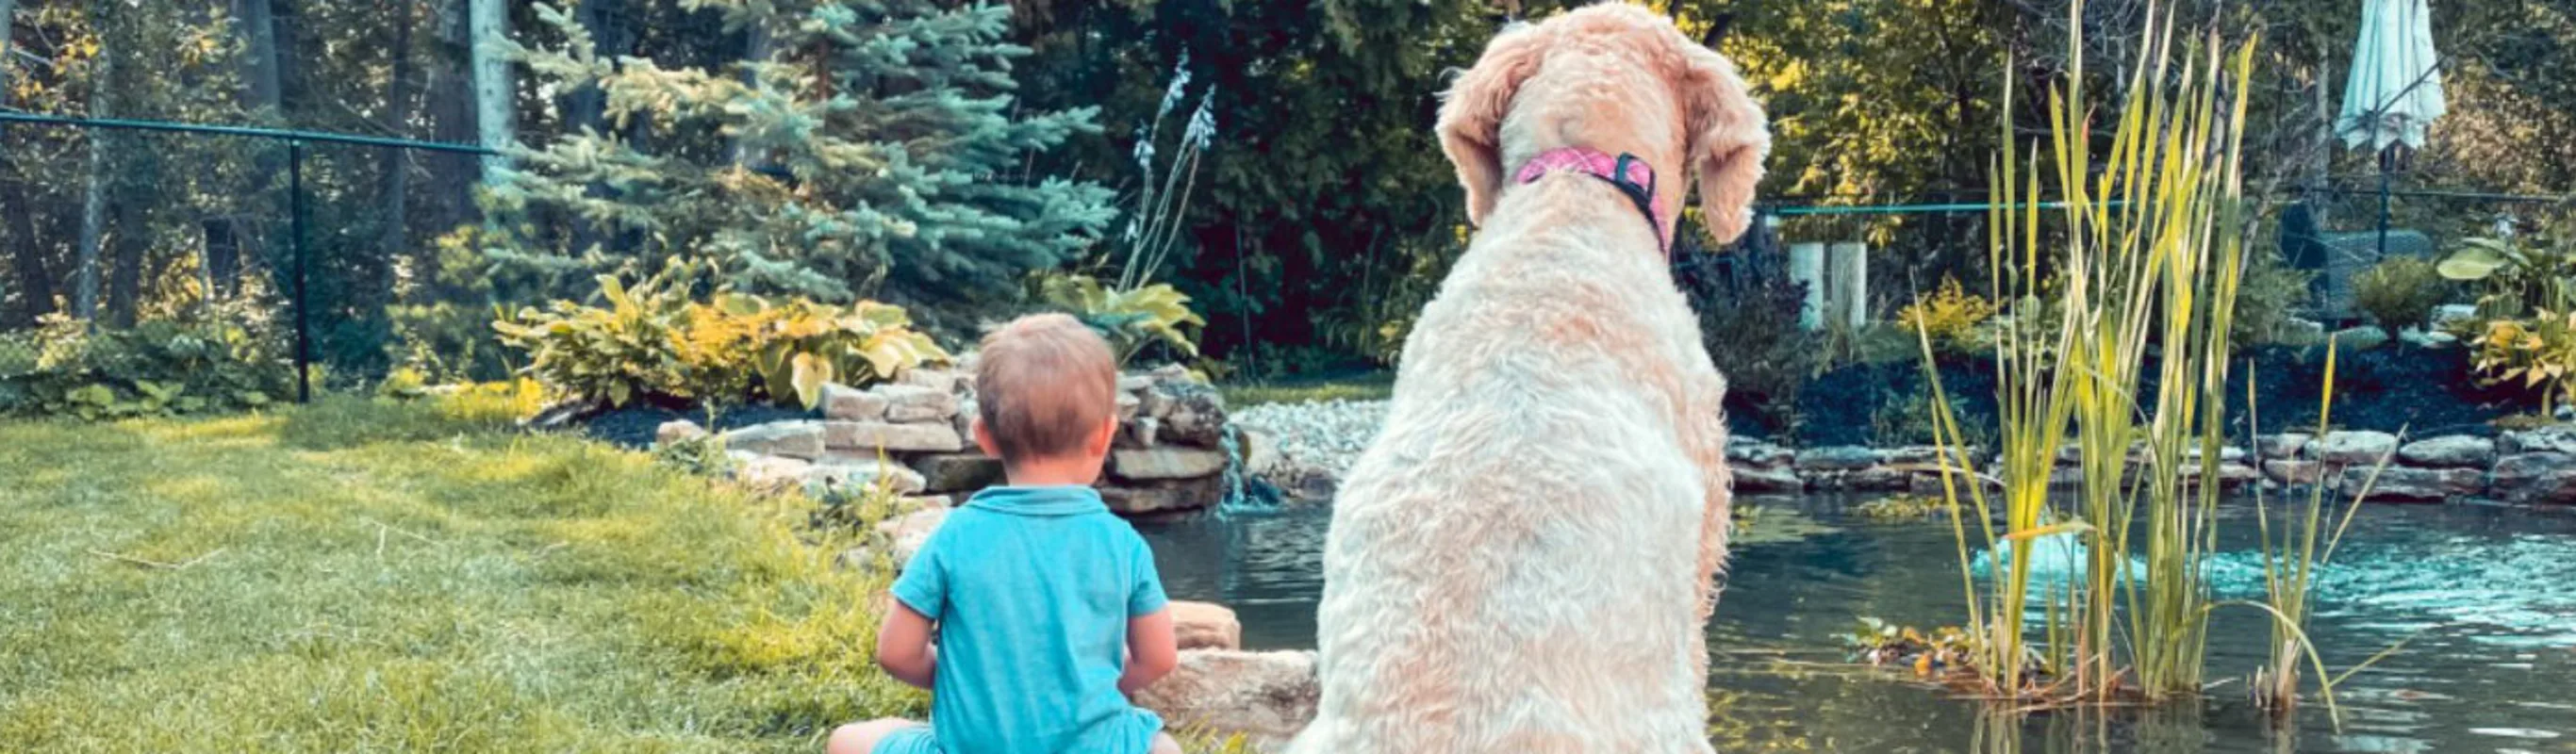 Dog and child sitting together by a pond 